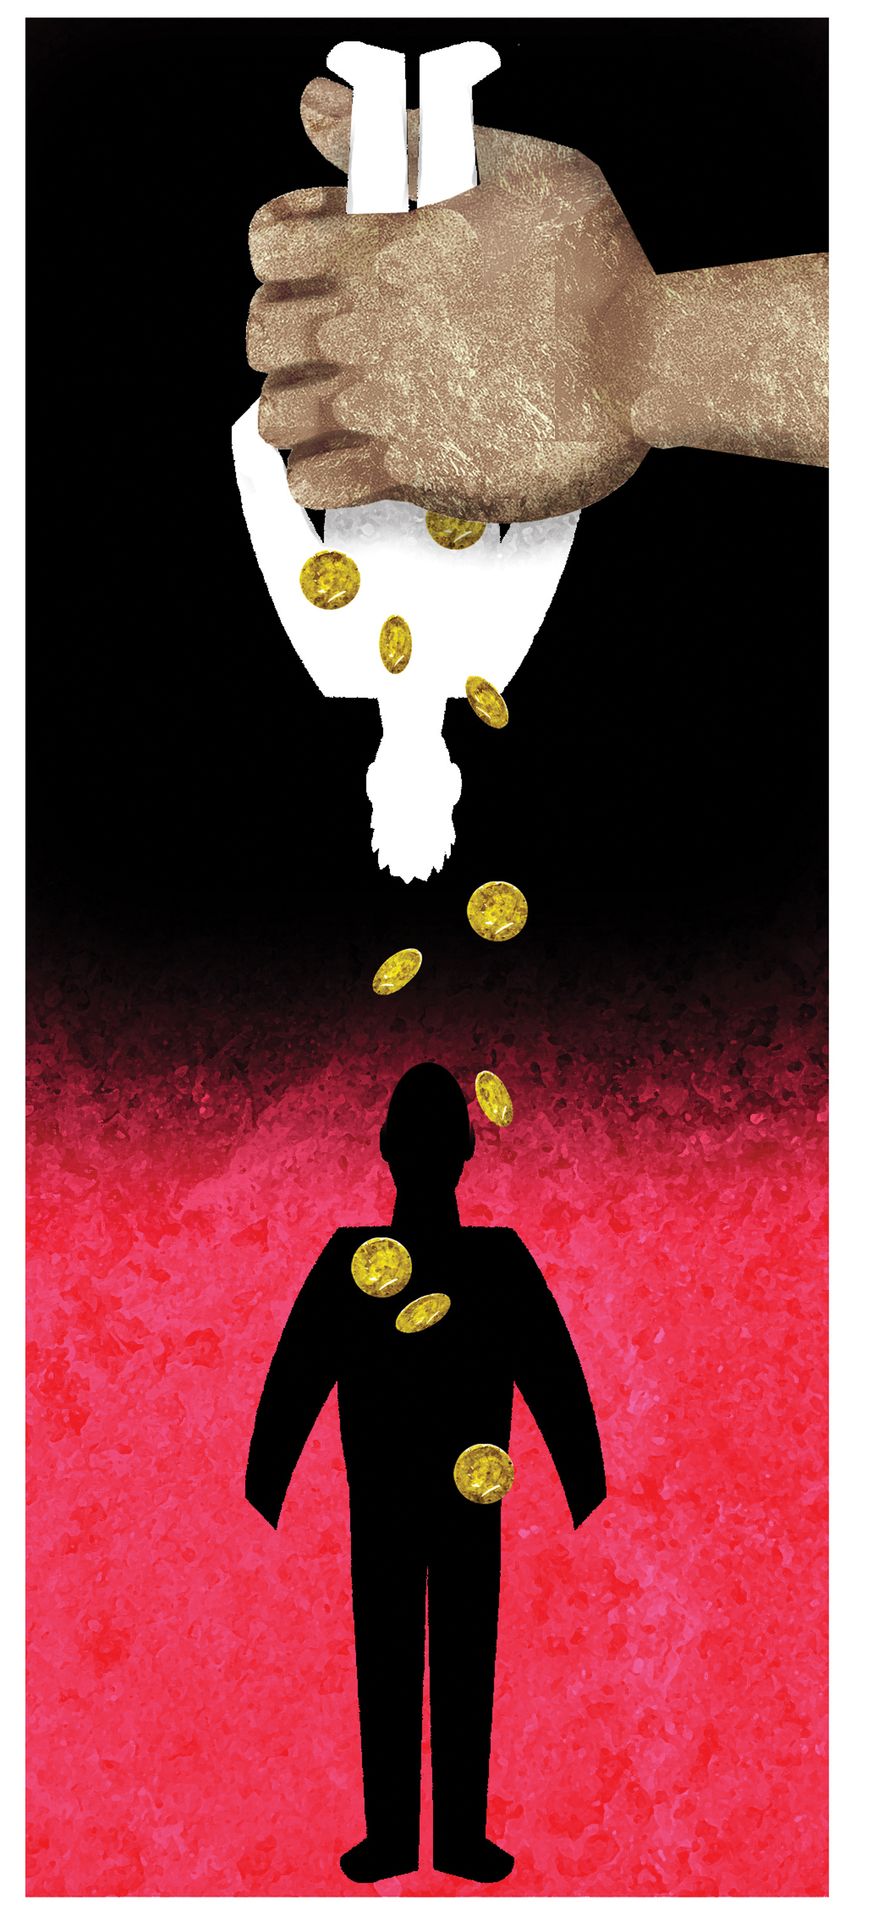 Illustration on reparations by Alexander Hunter/The Washington Times